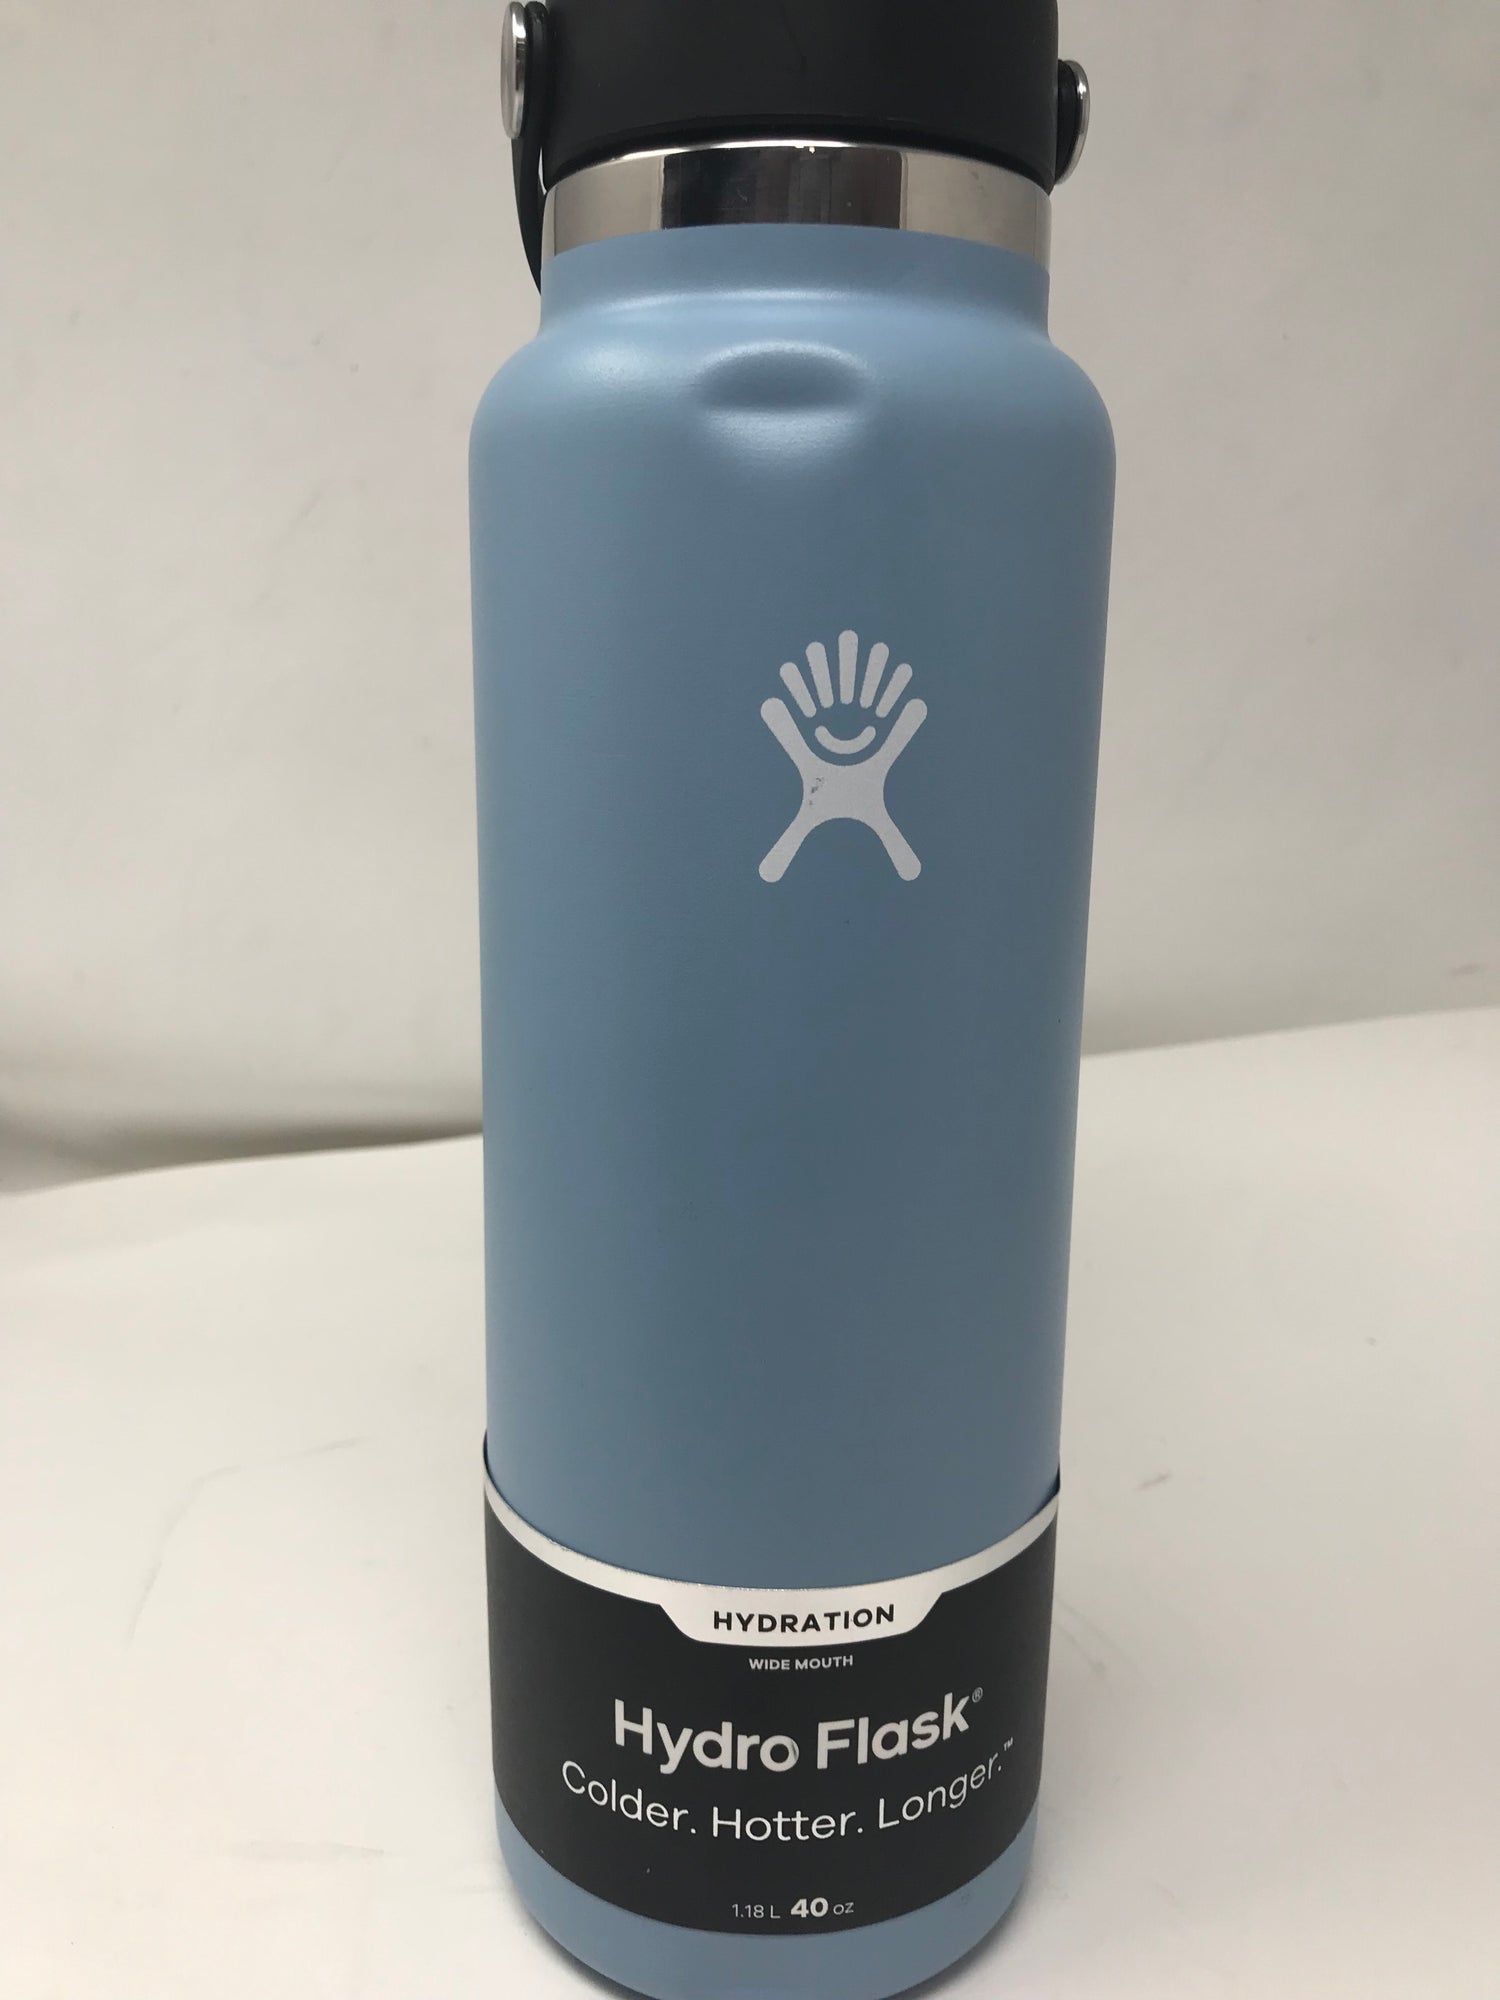 Hydro Flask Wide Mouth Straw Lid 40 Oz Old Lid Rain